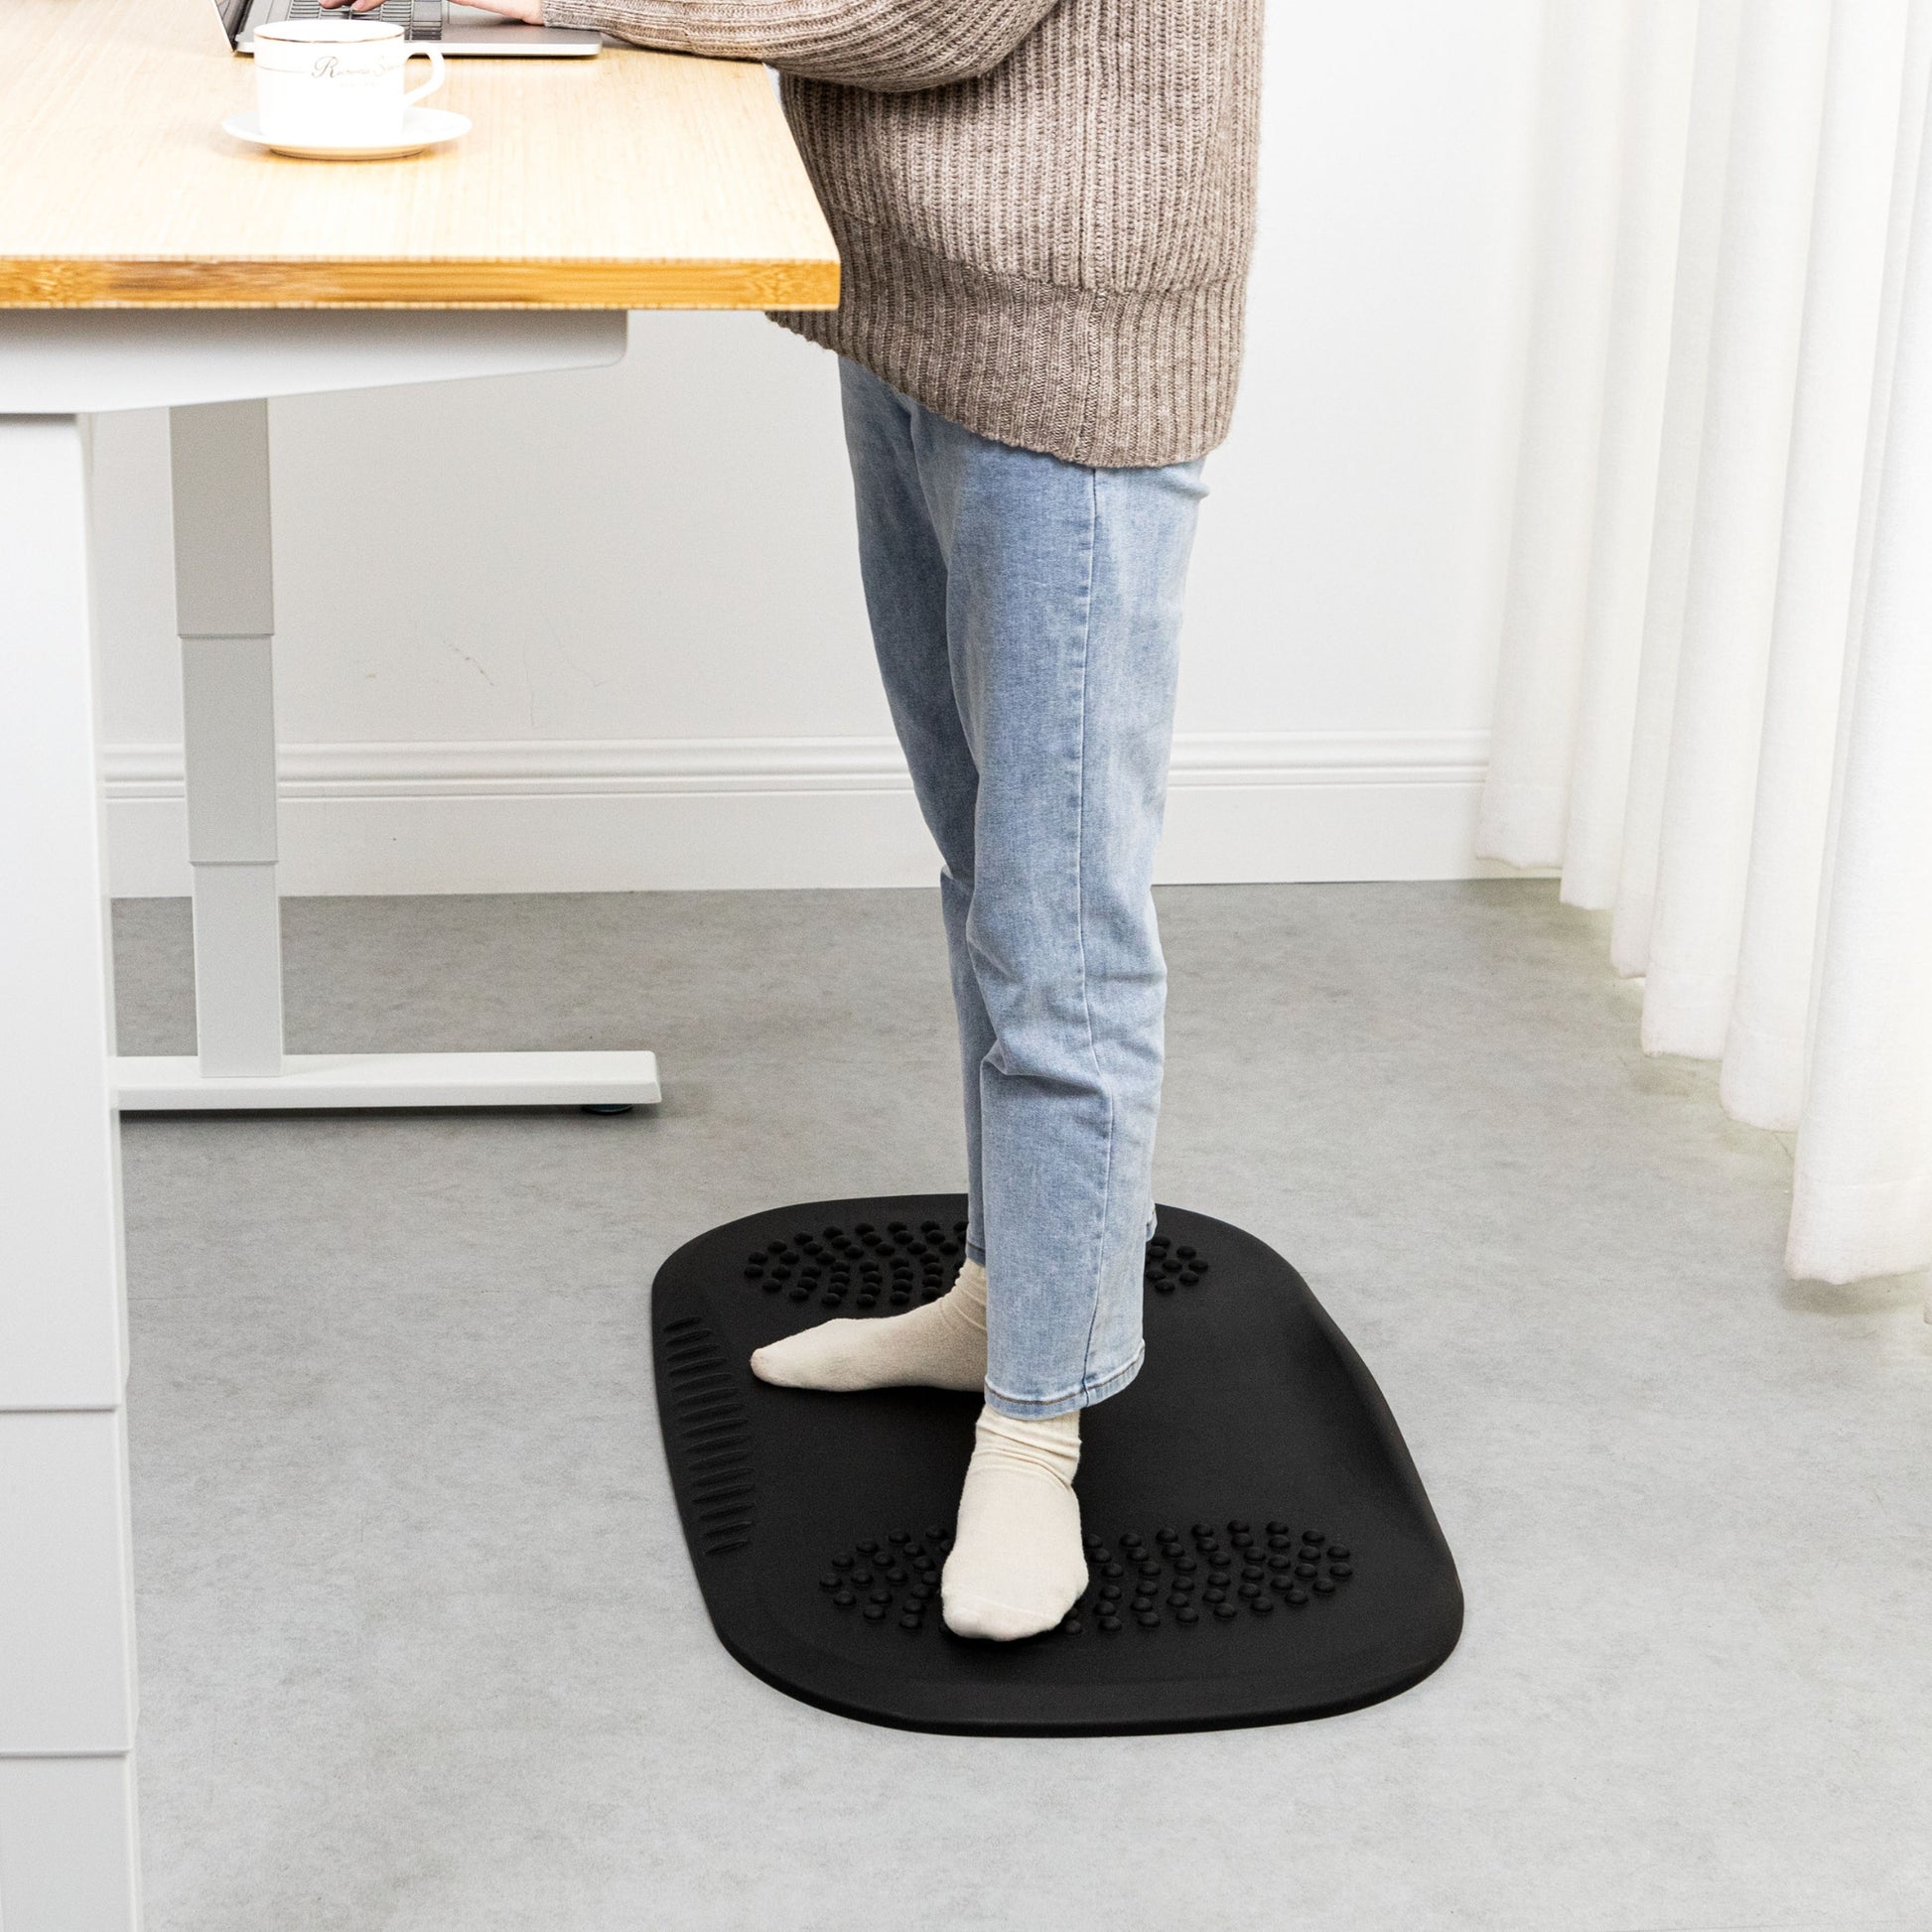 The Importance of Using Anti-Fatigue Mats with Your Standing Desk –  Progressive Desk